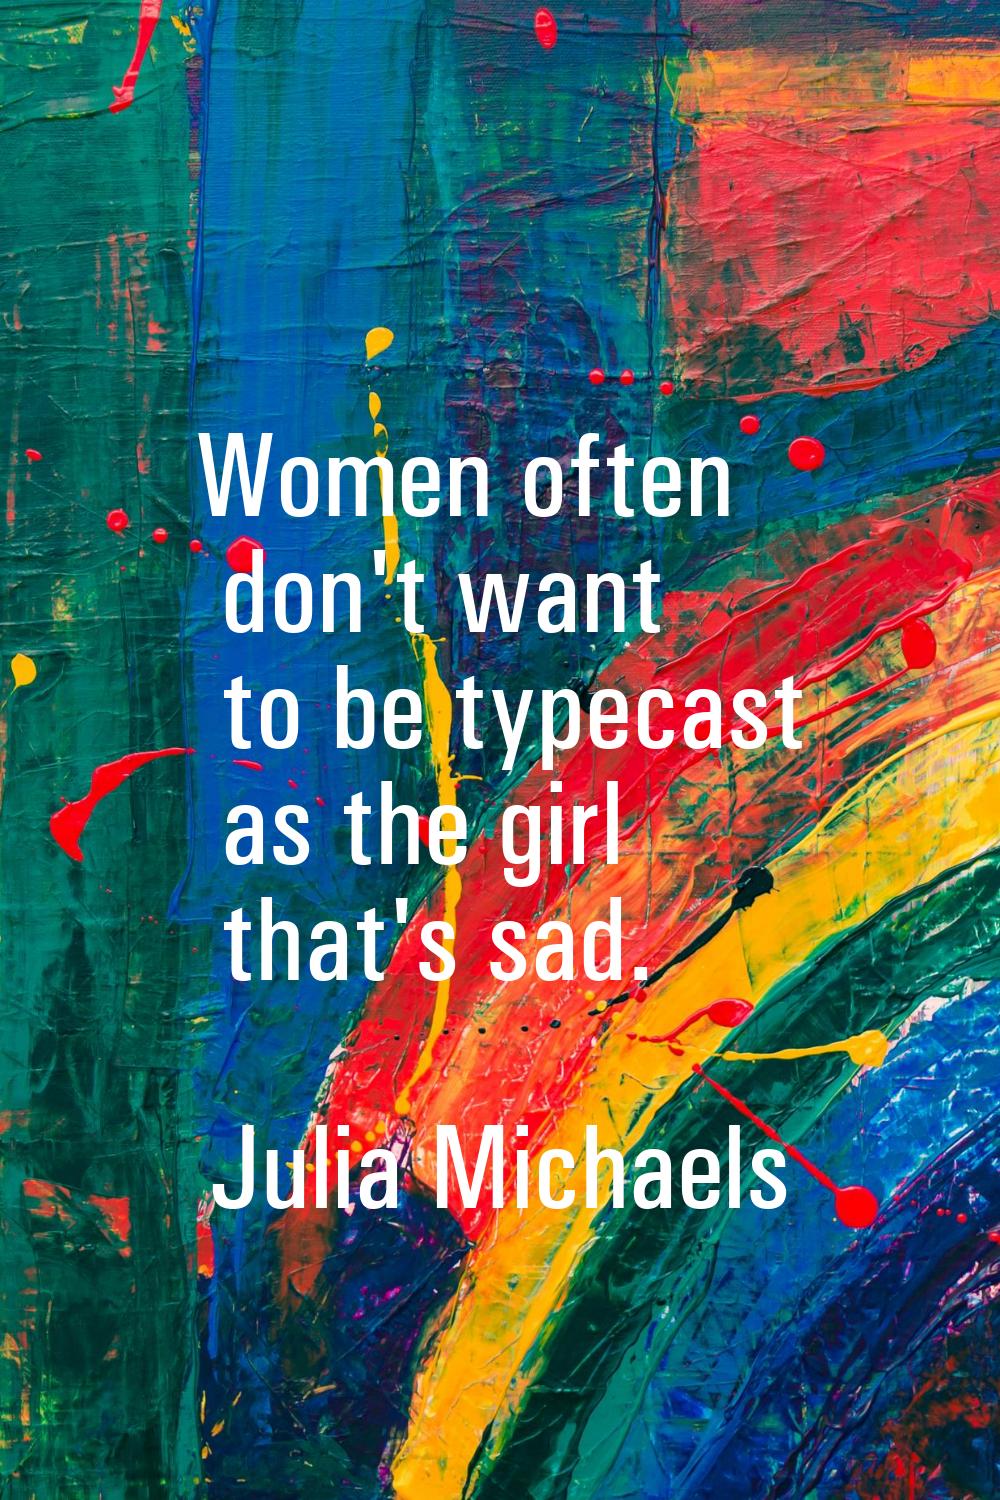 Women often don't want to be typecast as the girl that's sad.